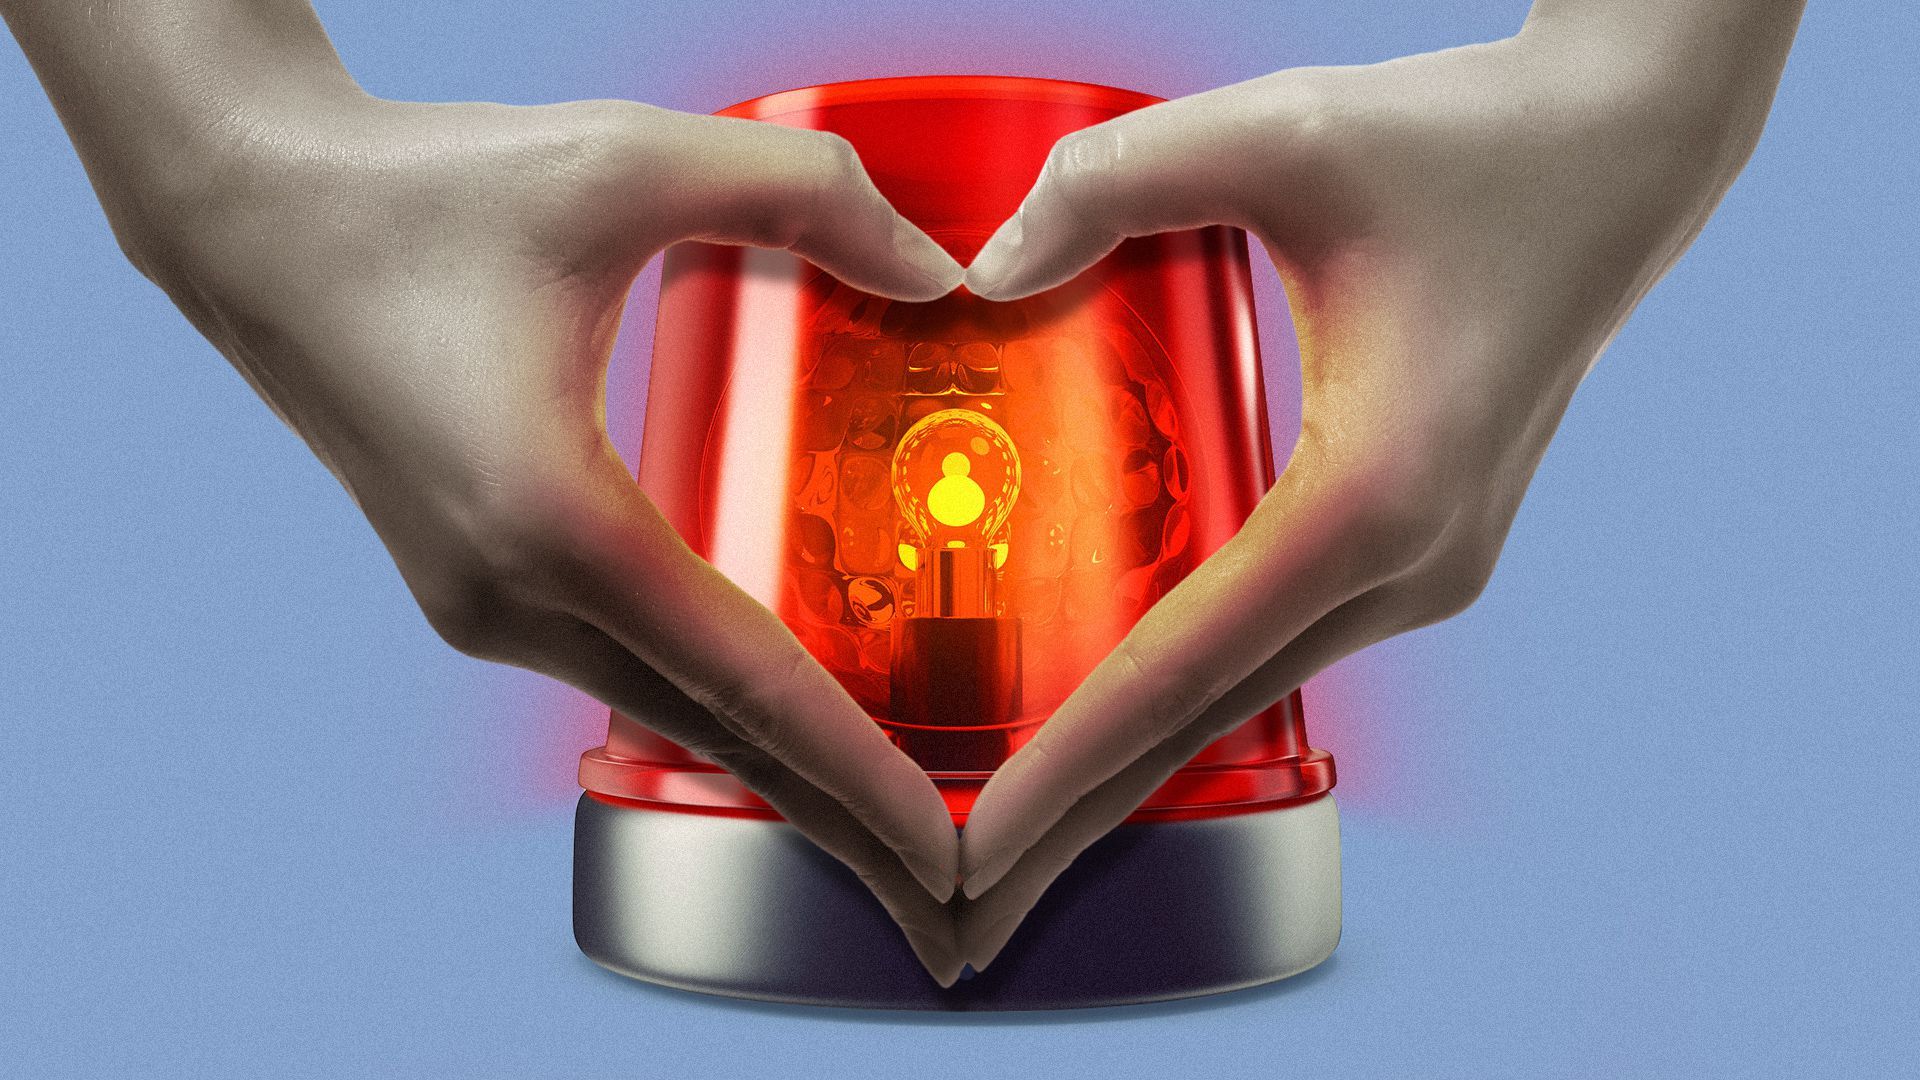 Illustration of a woman's hands making a heart shape over a red siren light.